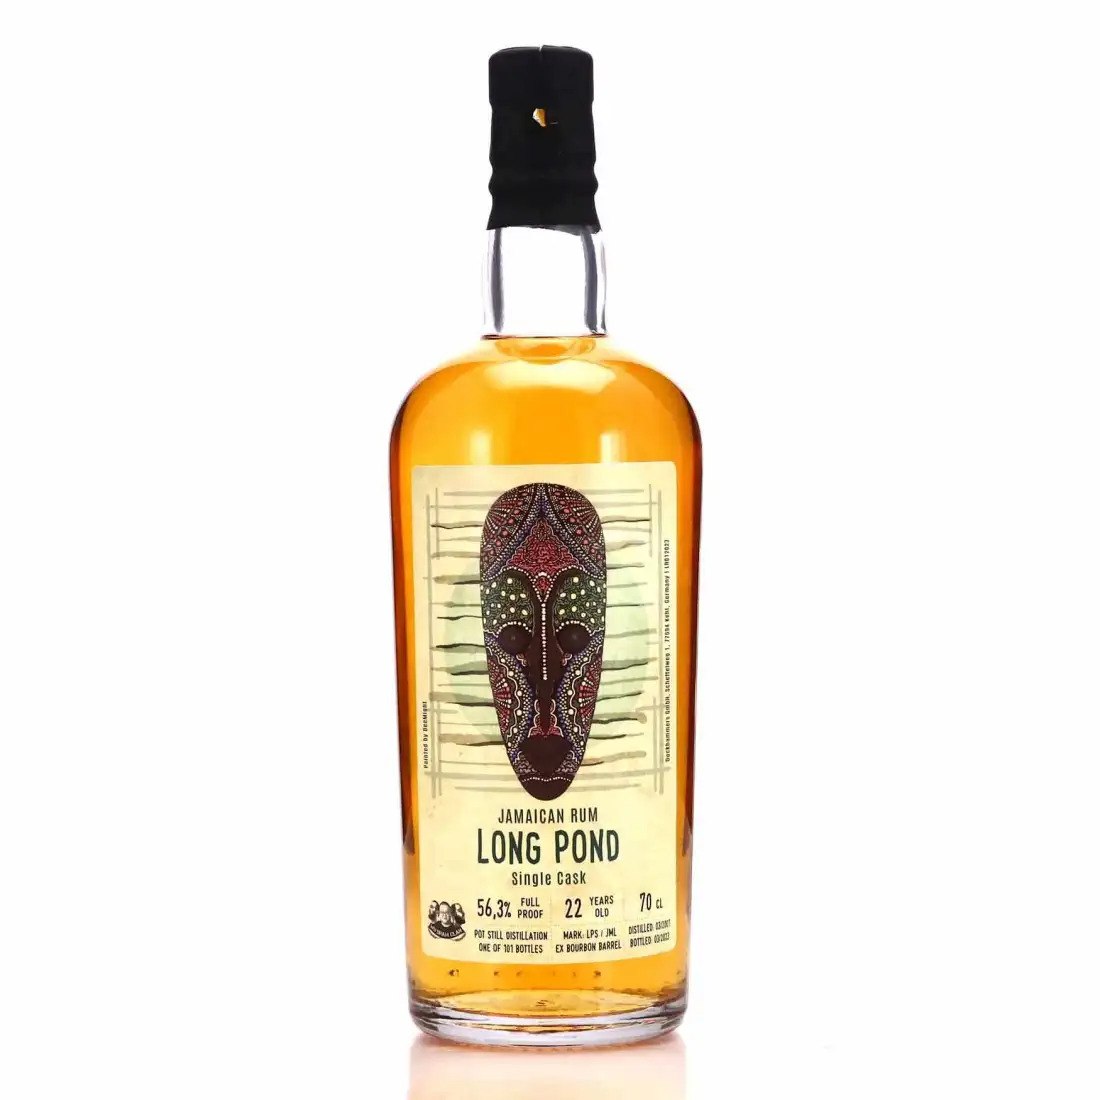 Image of the front of the bottle of the rum Jamaican Rum LPS